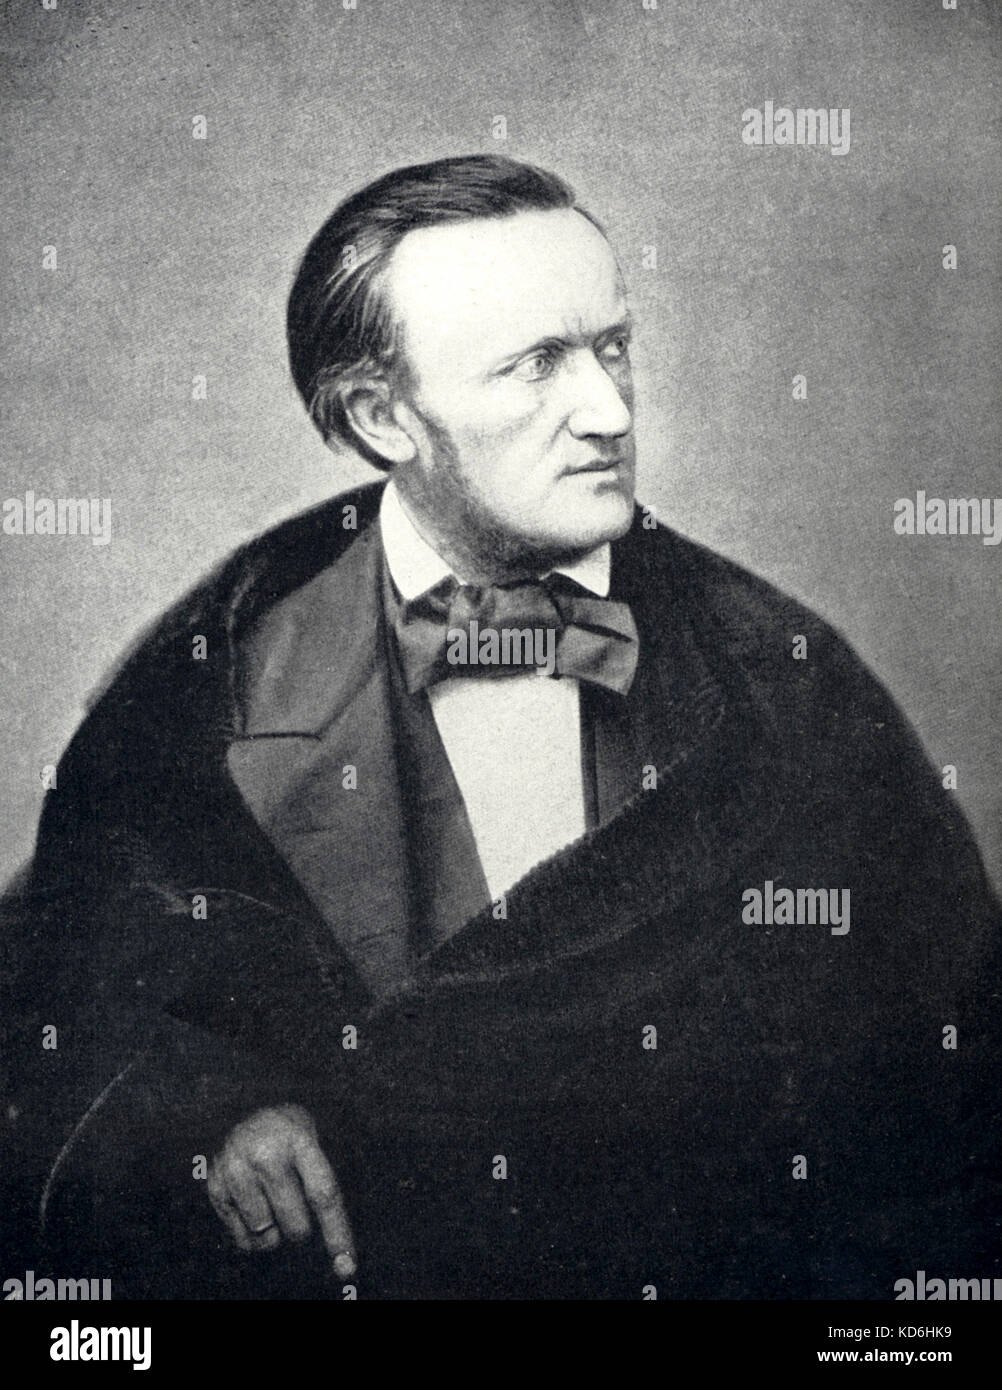 Richard Wagner, after 1860 photograph. German composer and author, 1813-1883. Stock Photo